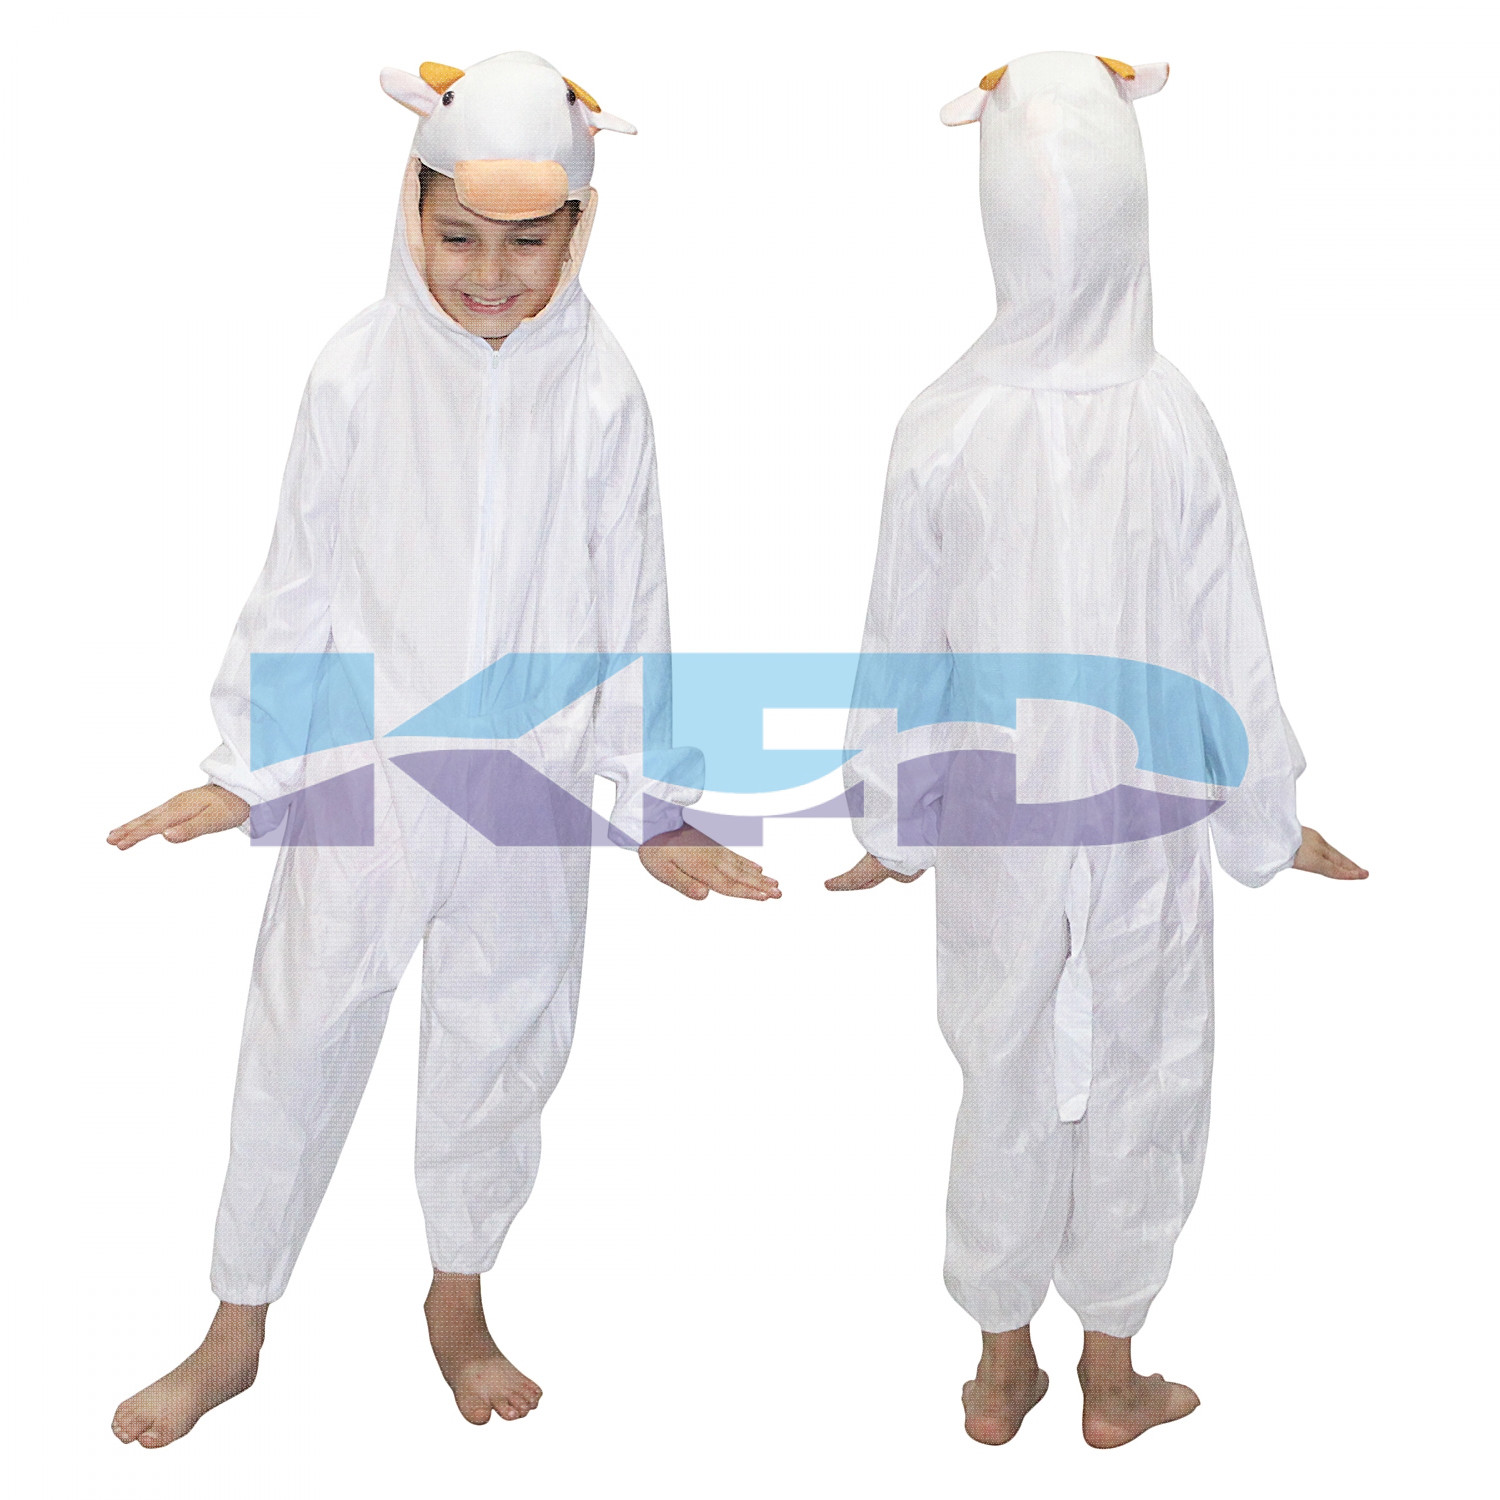 Calf fancy dress for kids,Wild Animal Costume for School Annual function/Theme Party/Competition/Stage Shows Dress